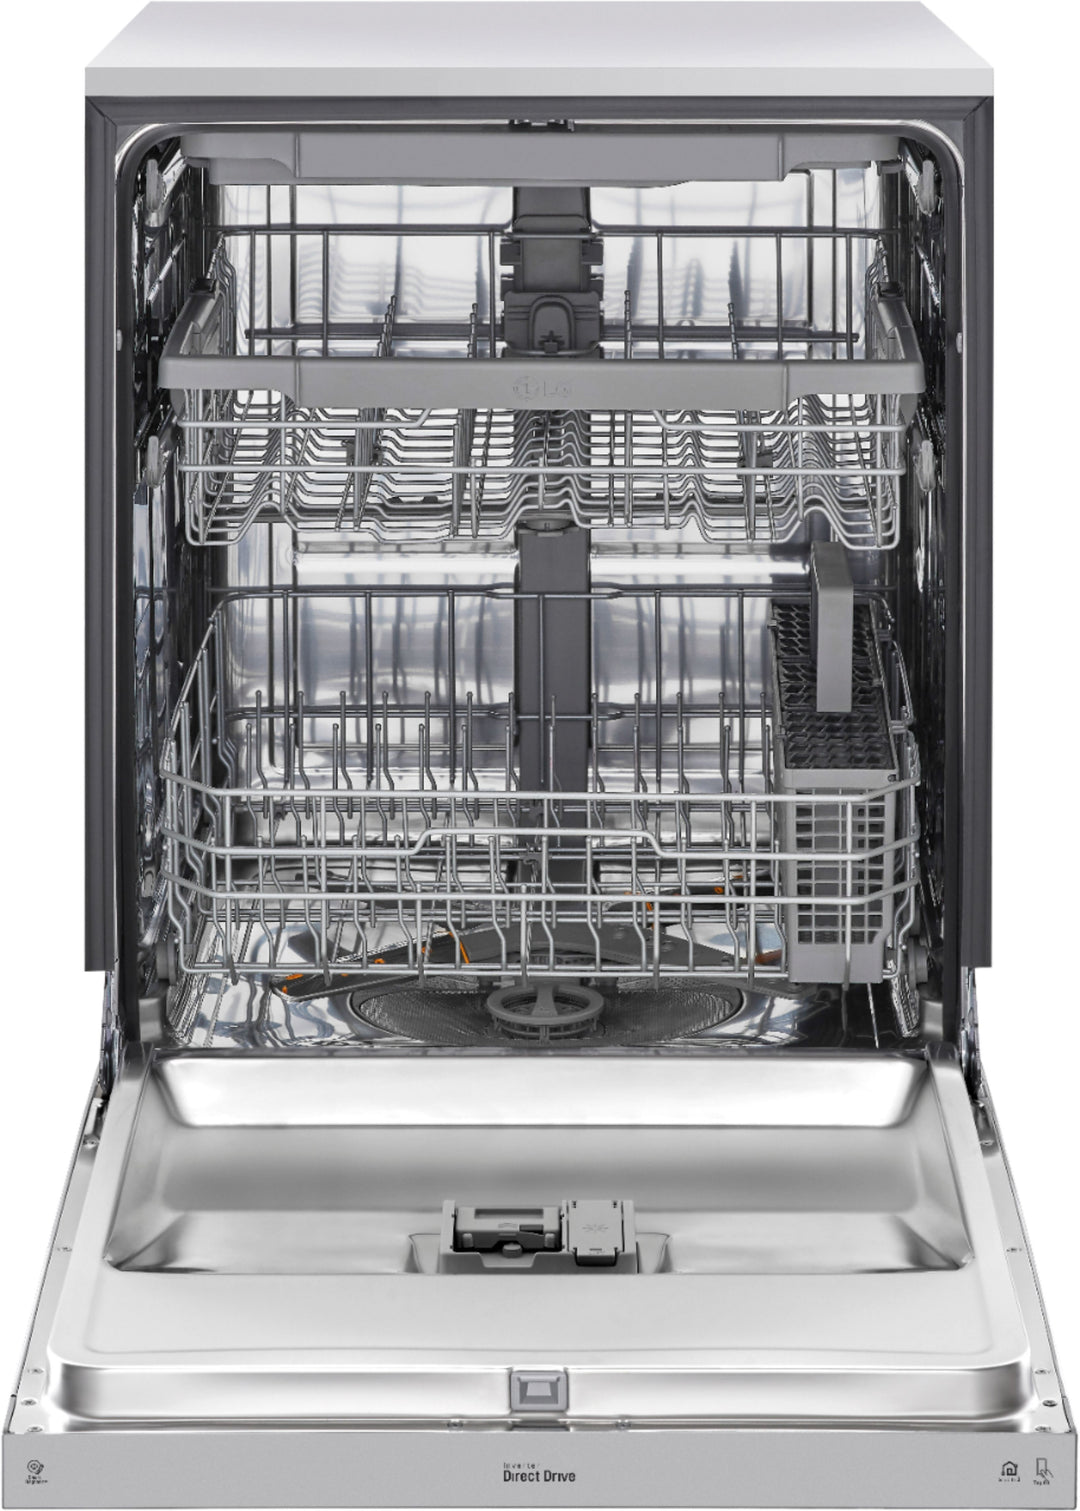 LG - 24" Front Control Smart Built-In Stainless Steel Tub Dishwasher with 3rd Rack, Quadwash, and 48dba - Stainless steel_4